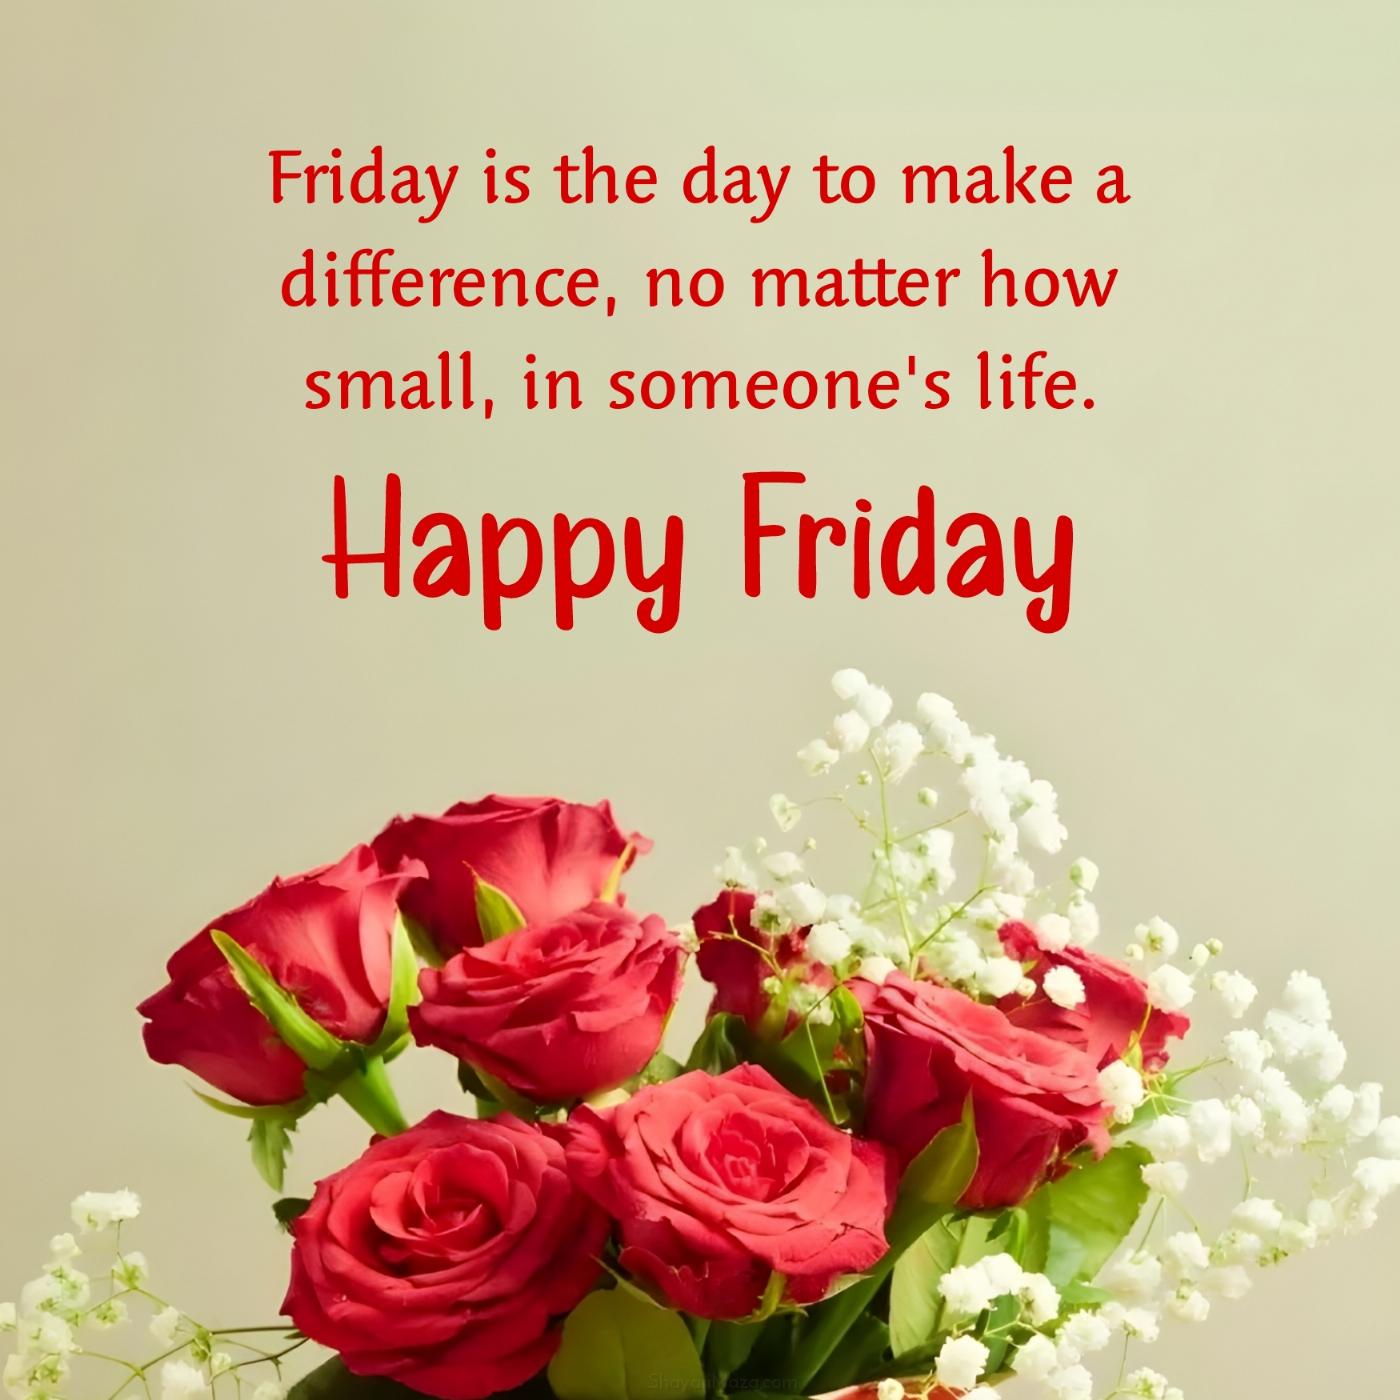 Friday is the day to make a difference no matter how small